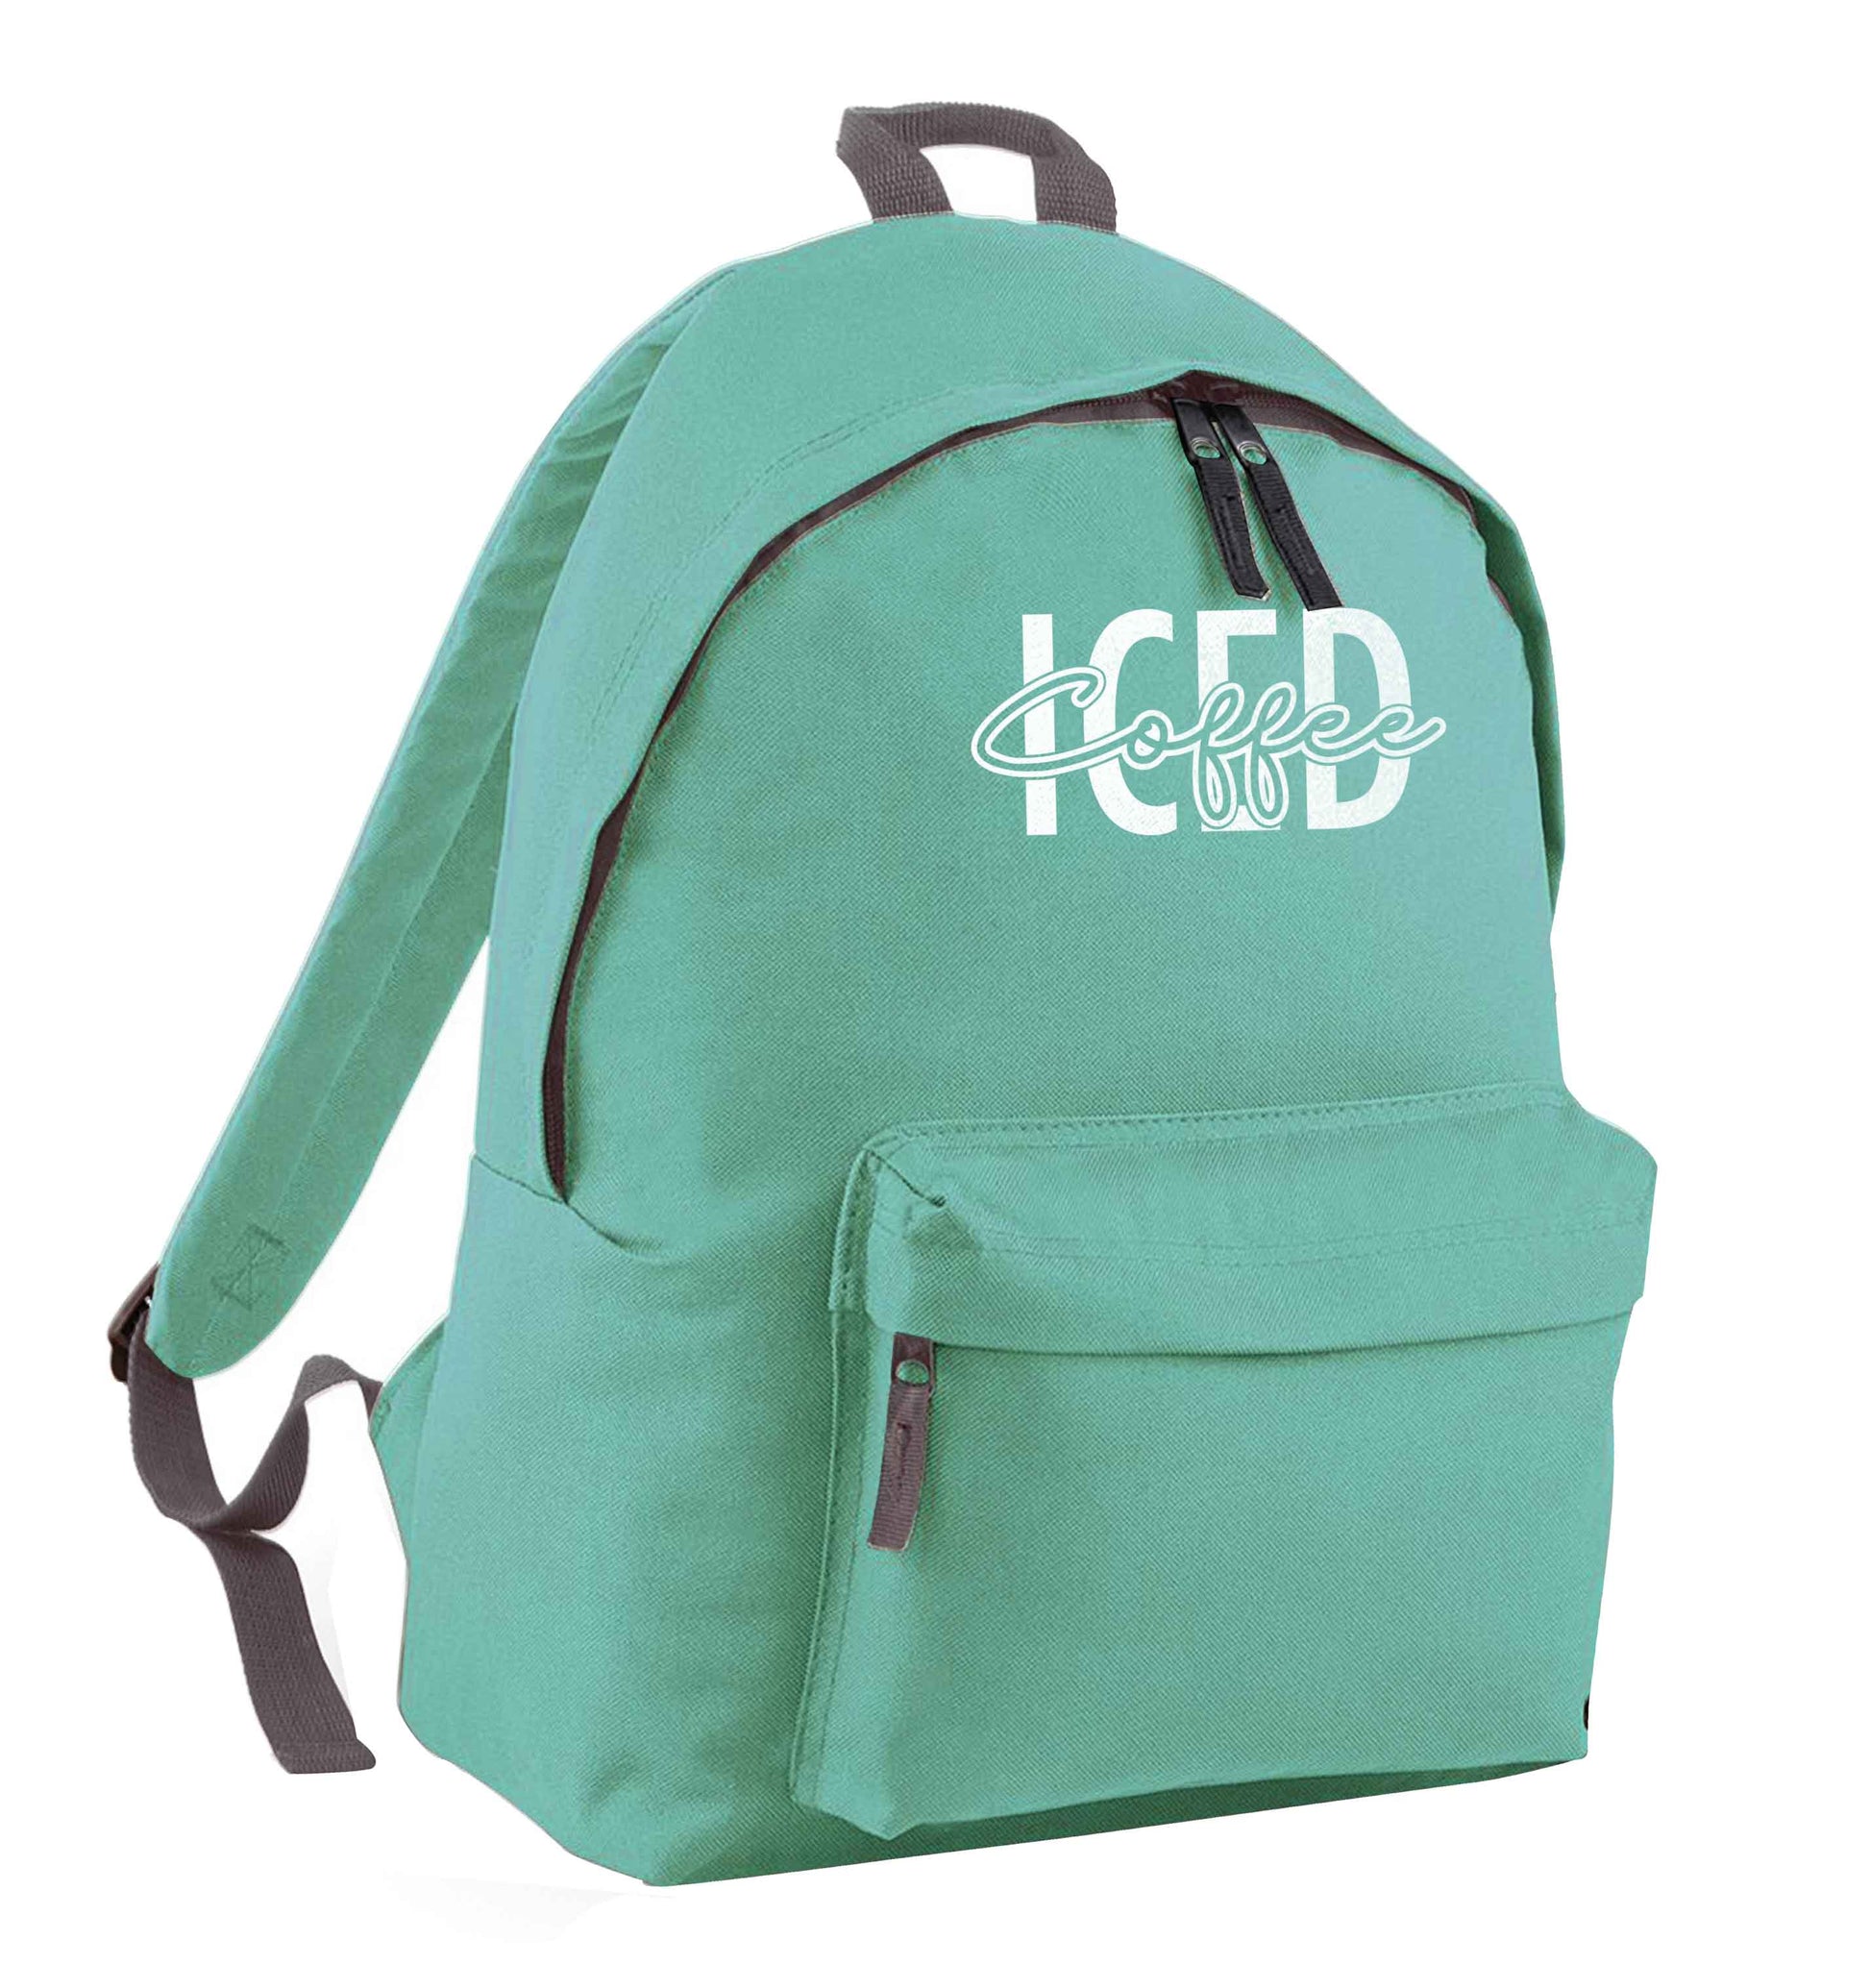 Iced Coffee mint adults backpack